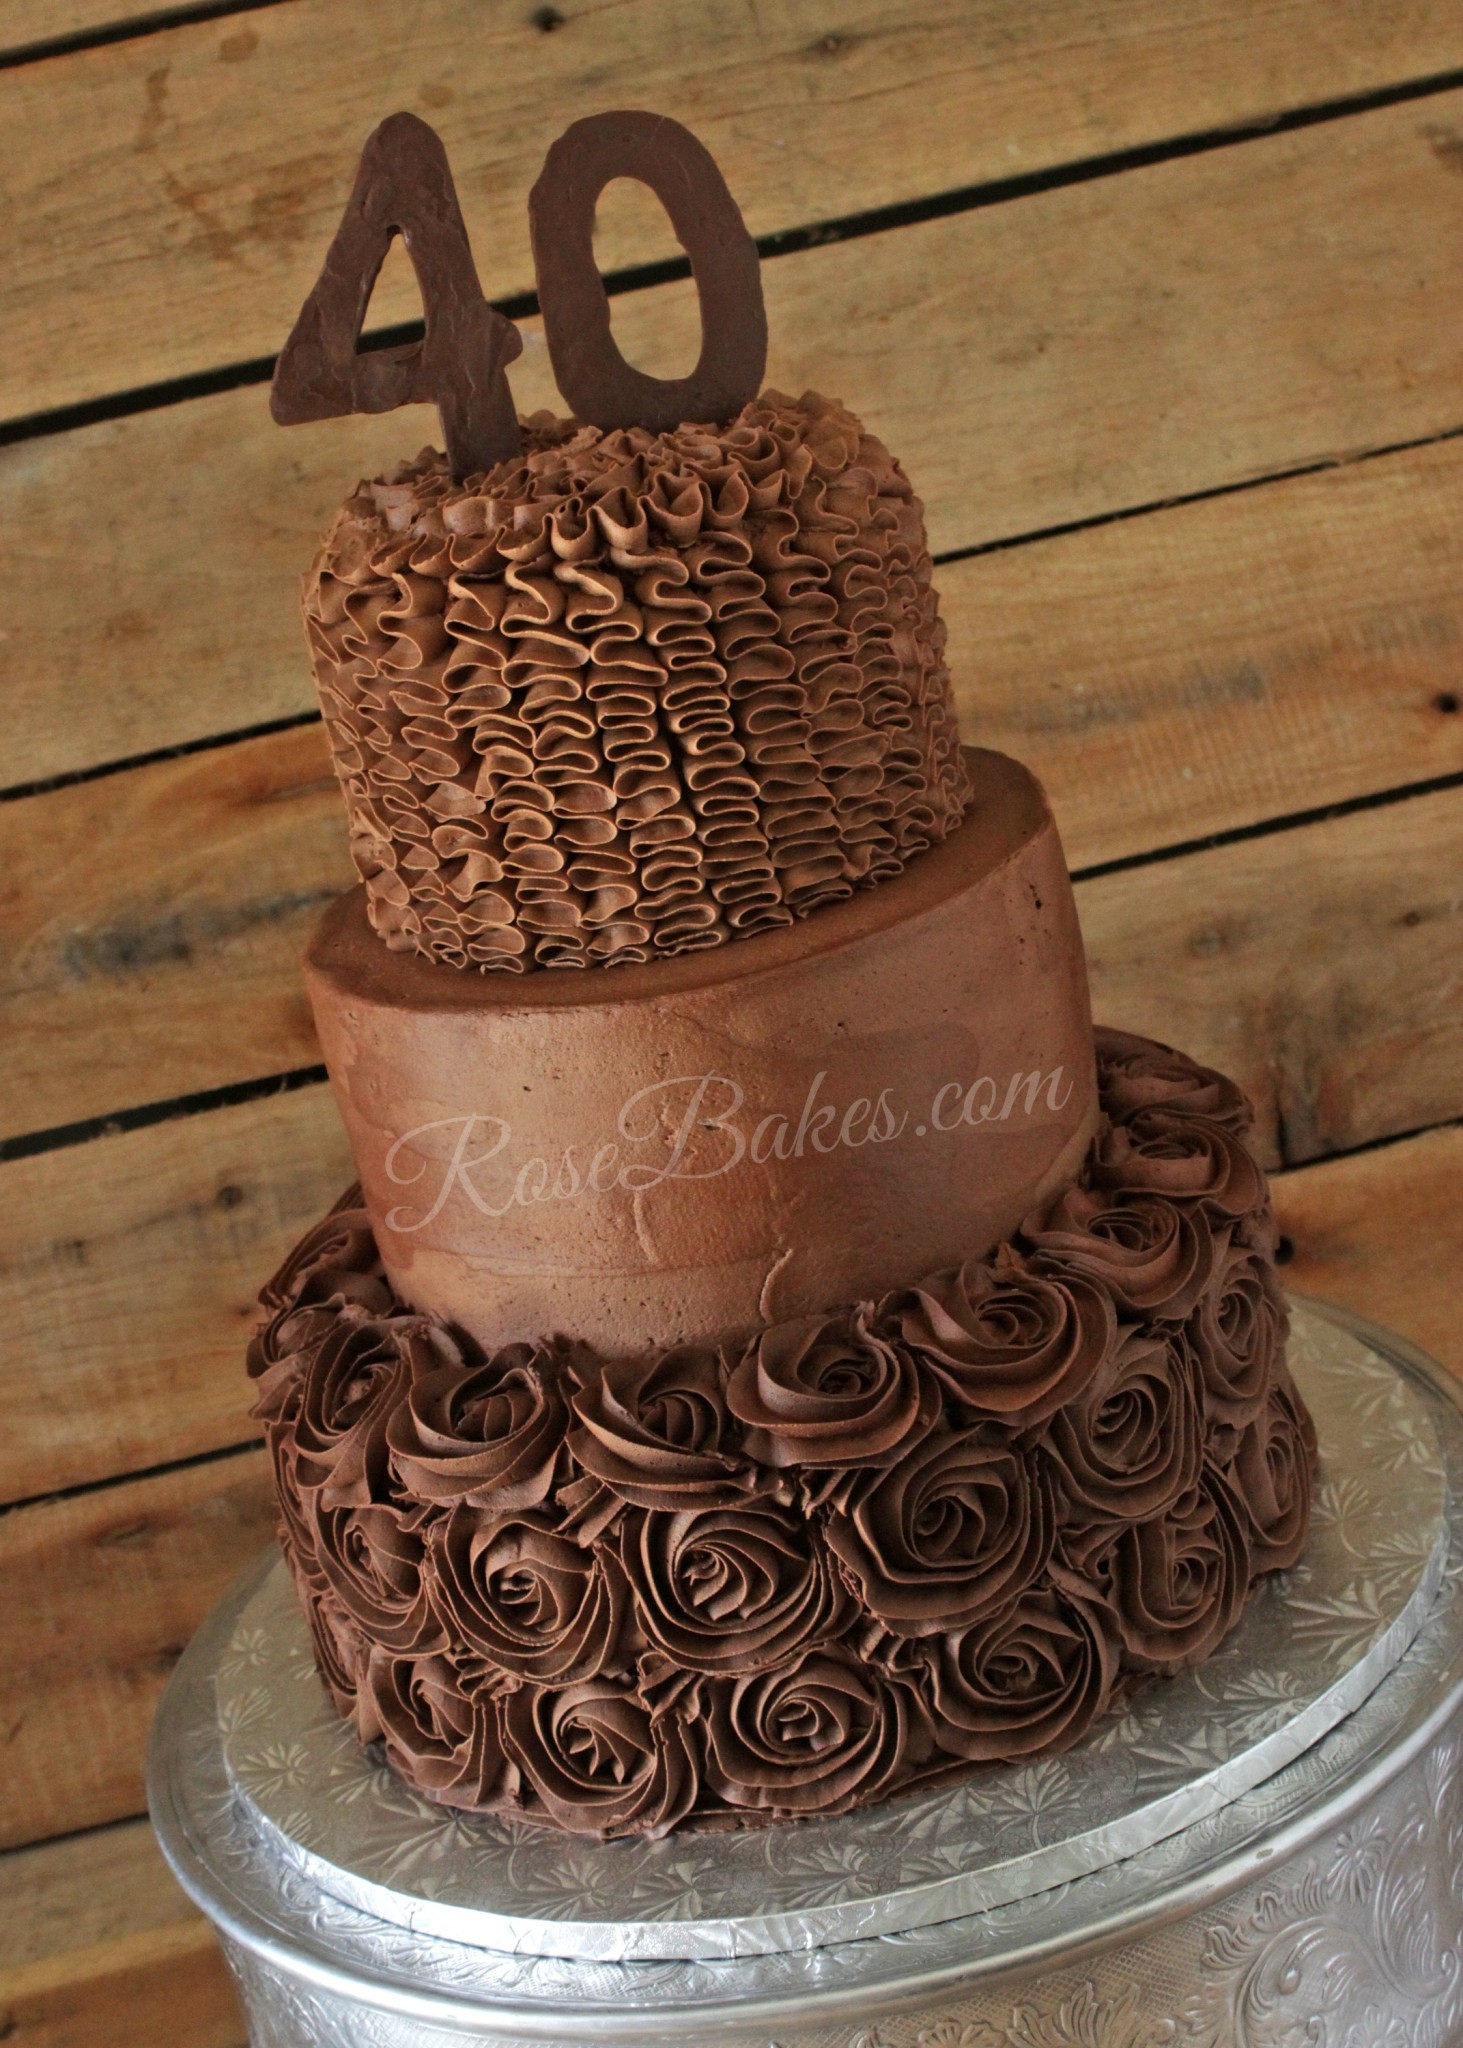 40th Birthday Cake Ideas
 "Over the Hill" 40th Birthday Cake Rose Bakes